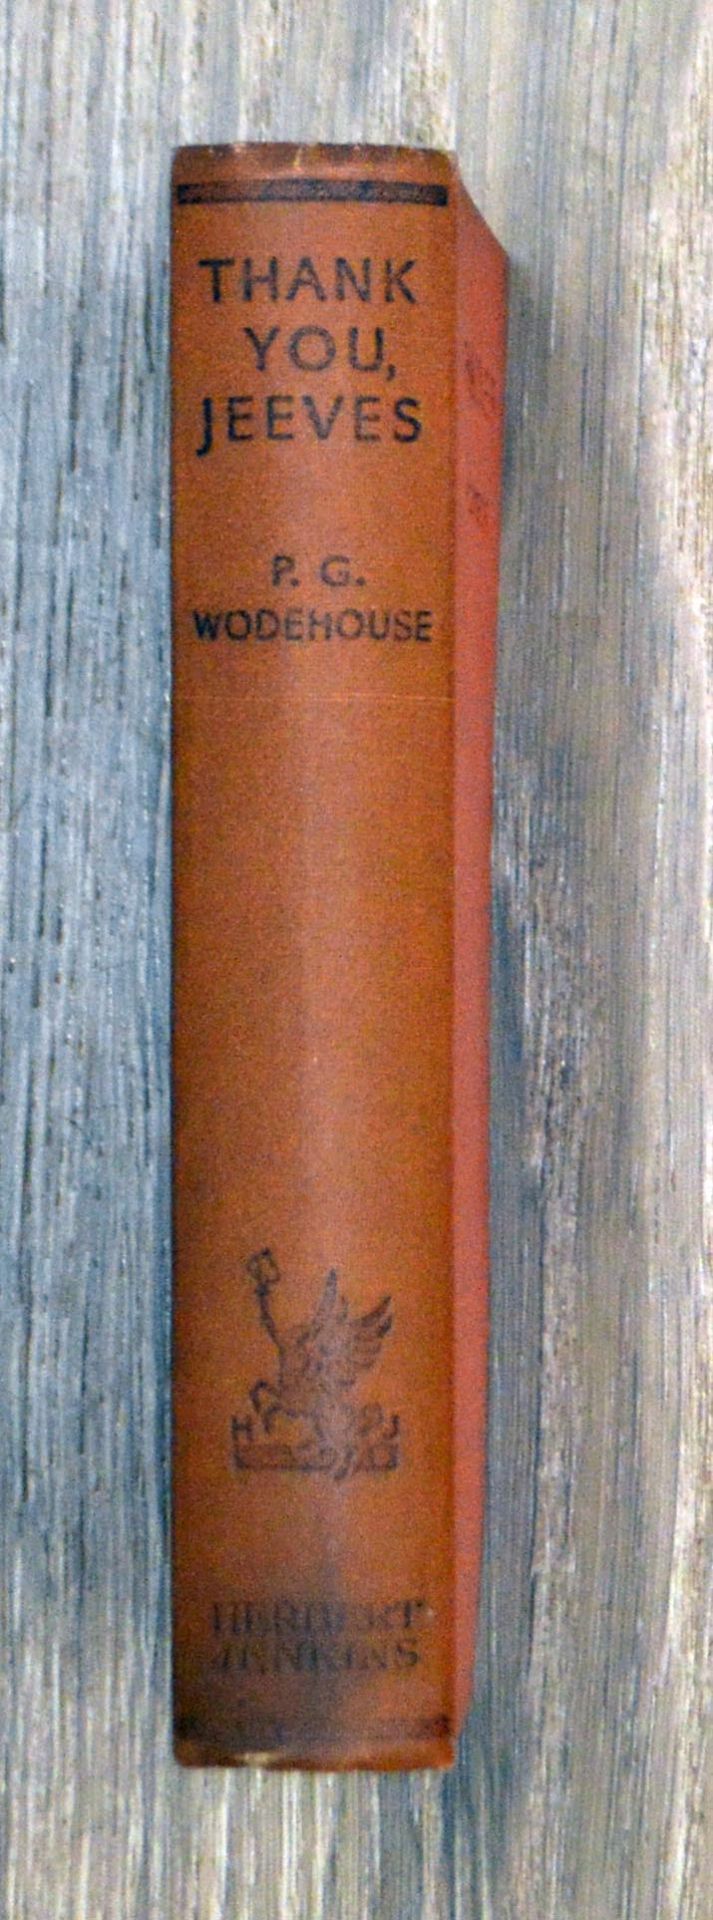 [Books] P.G.Wodehouse Thank You Jeeves 4th Printing VG Condition - Image 5 of 6